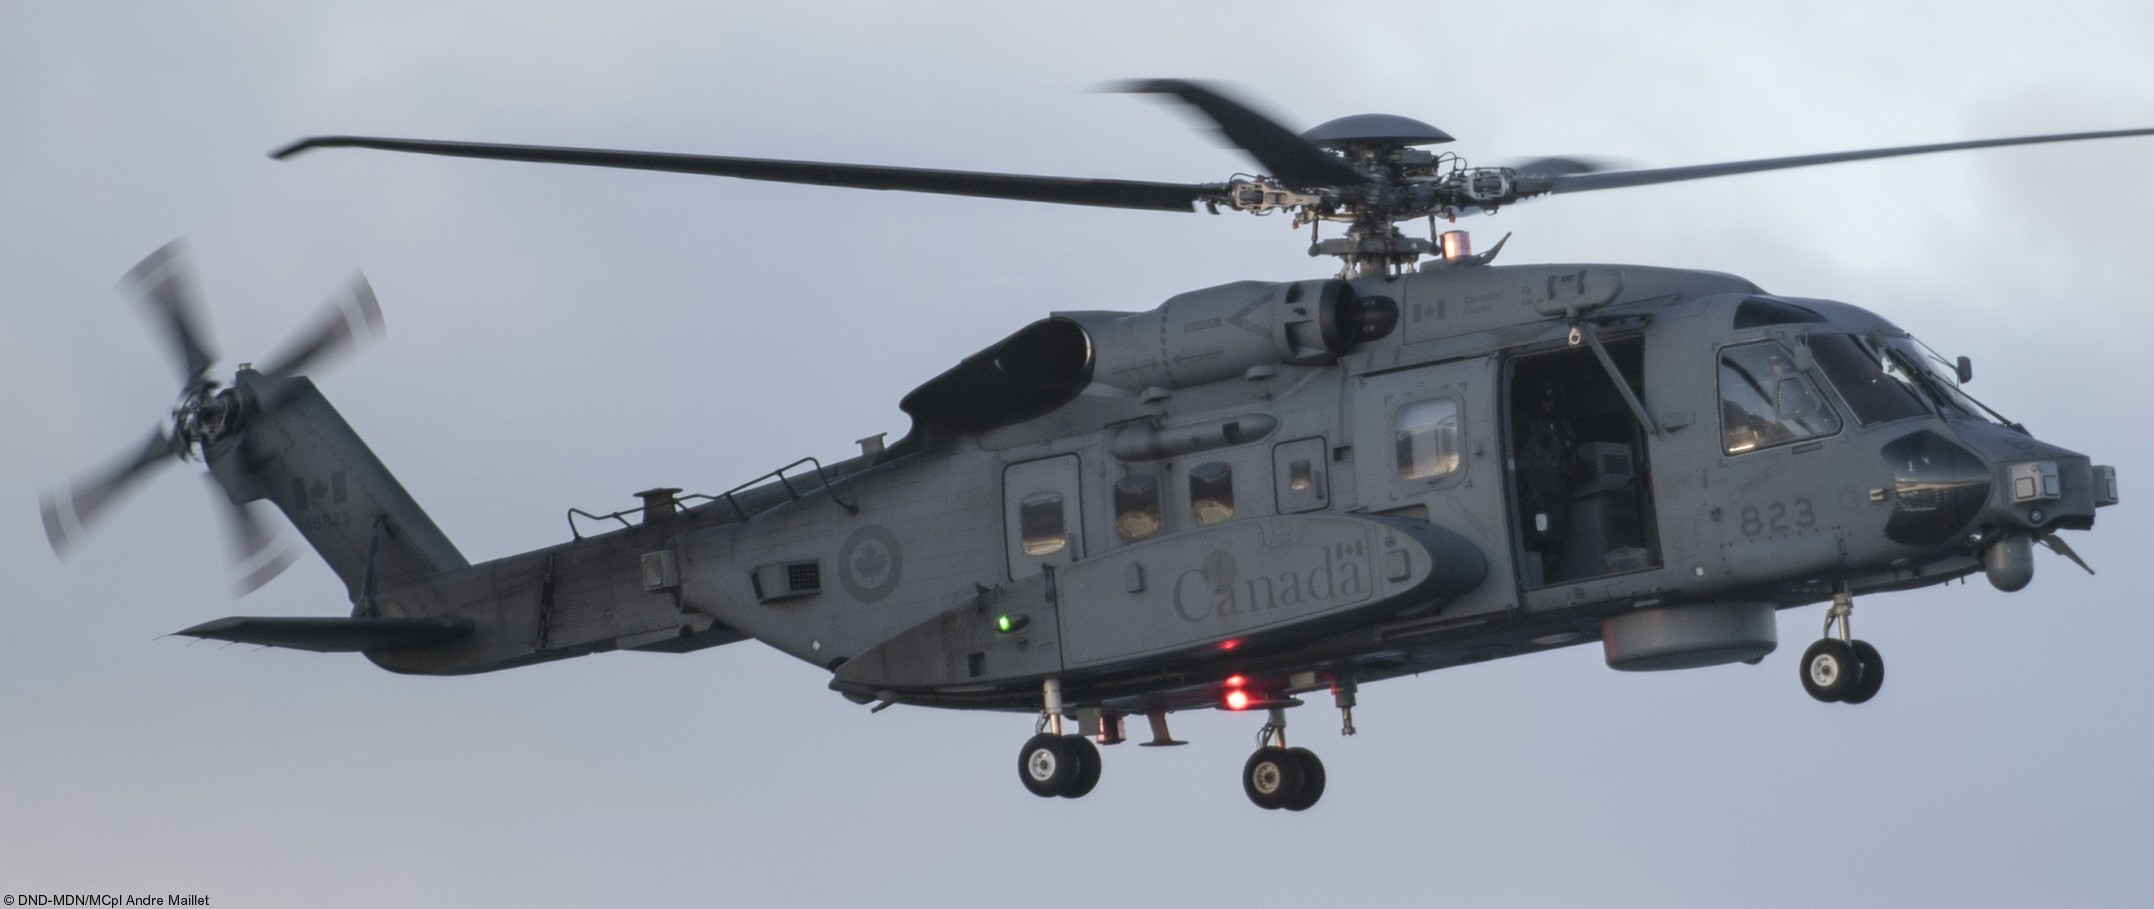 ch-148 cyclone naval helicopter royal canadian air force navy rcaf sikorsky hmcs 406 423 443 maritime squadron 19